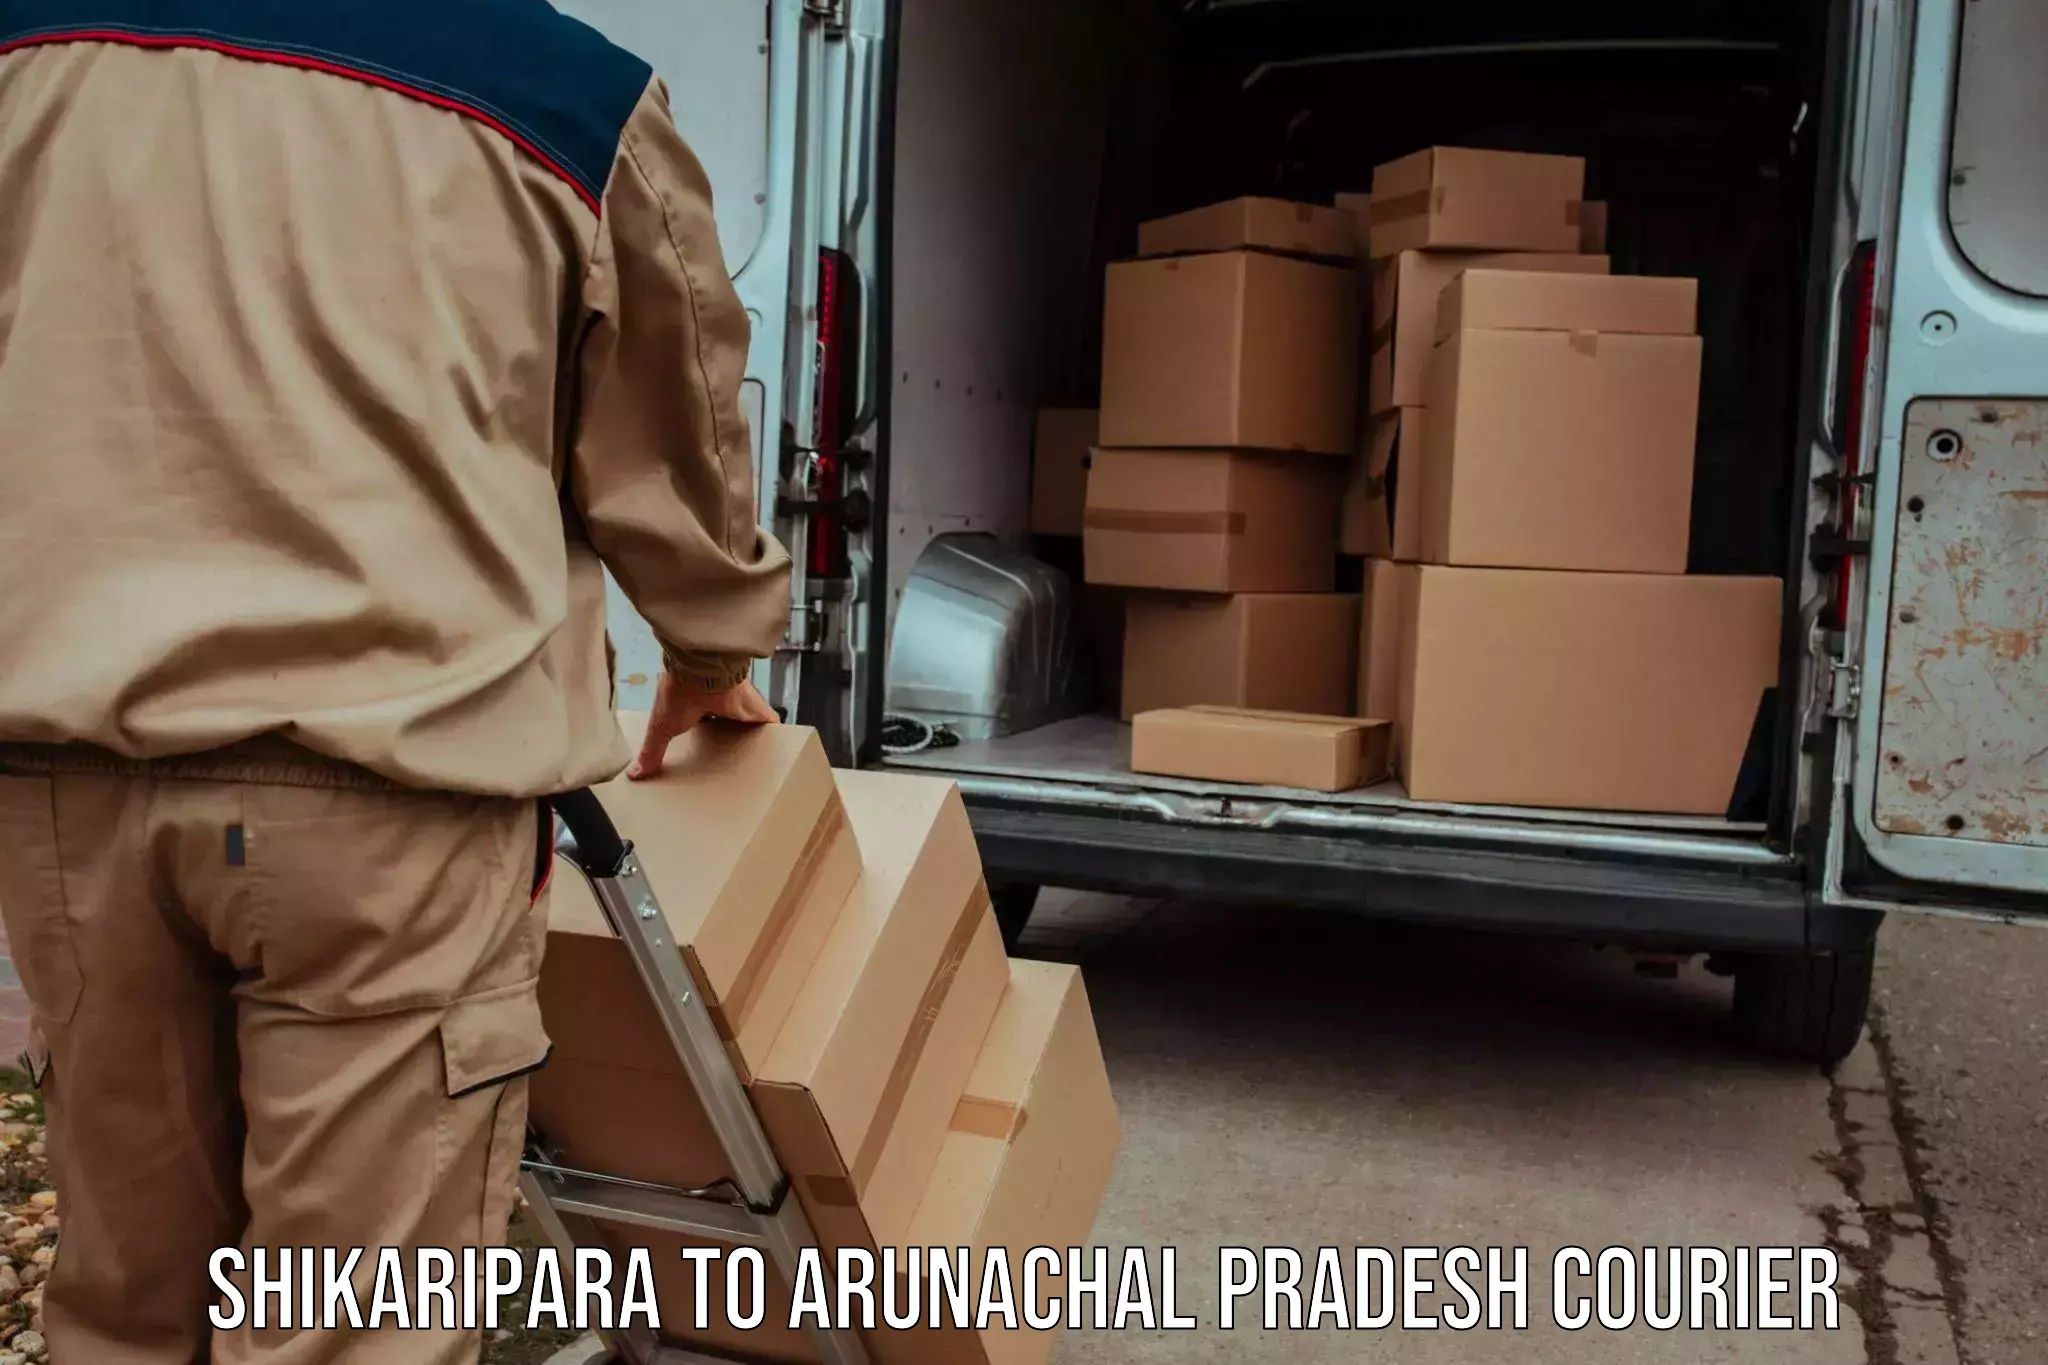 Round-the-clock parcel delivery Shikaripara to Tezu